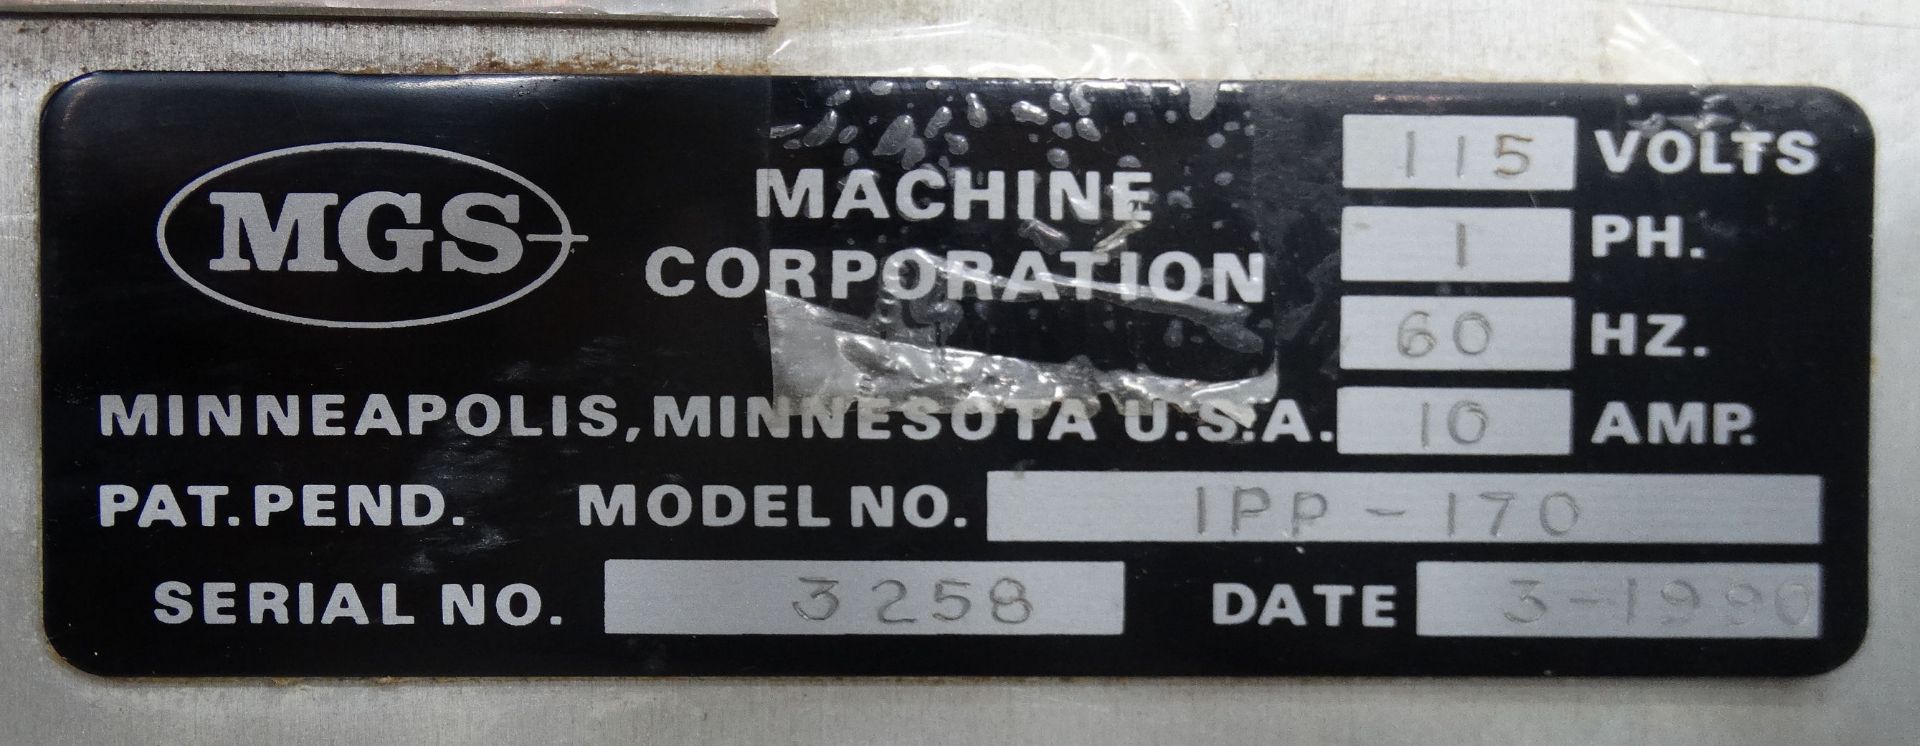 MGS IPP-170 Card Placer B4992 - Image 10 of 10